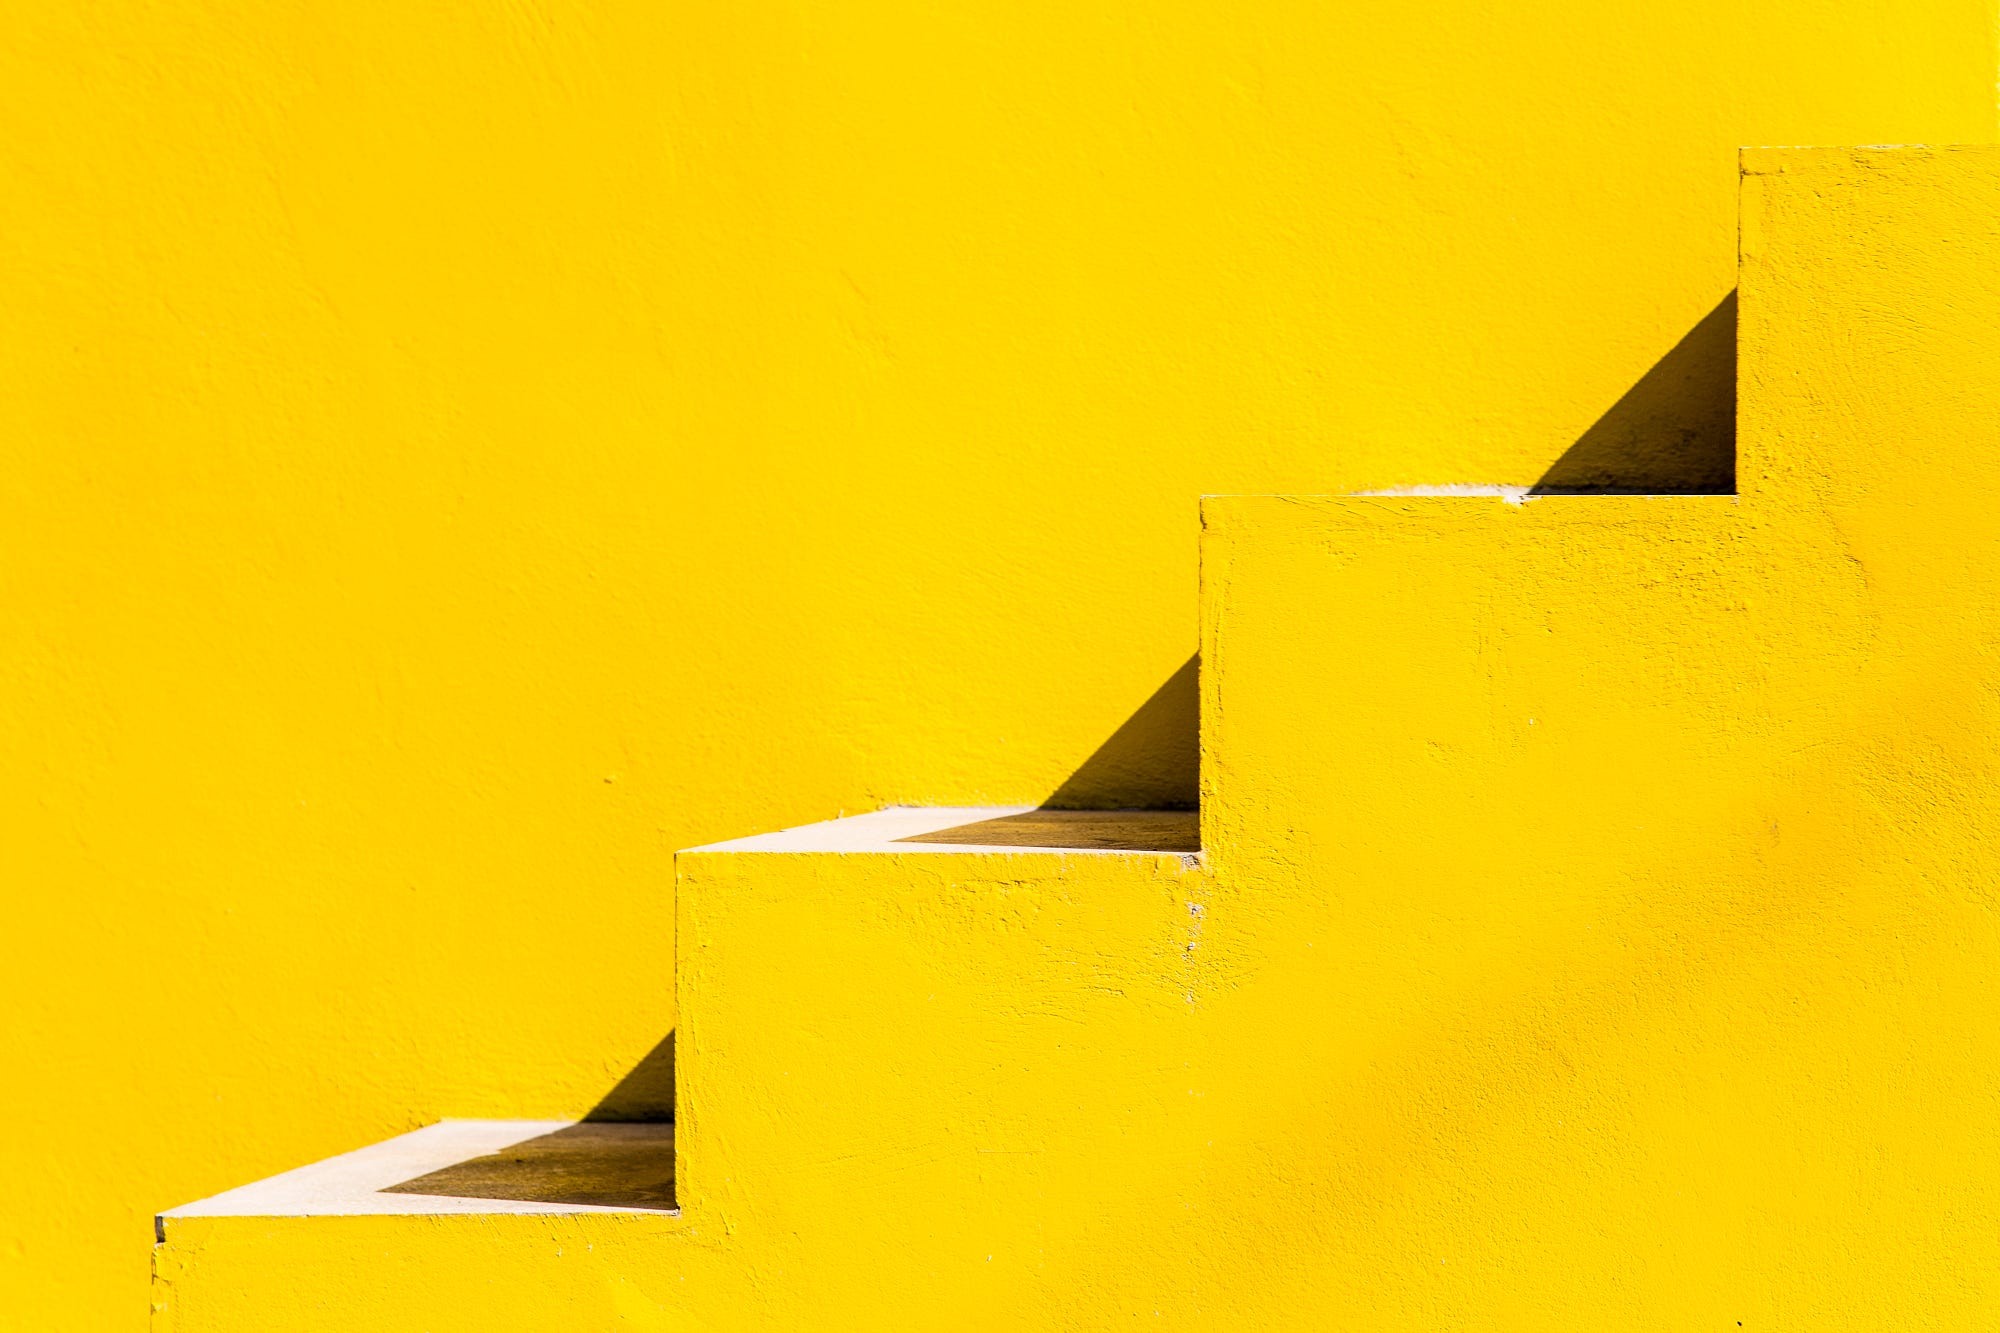 Angle Texture Staircase Geometry Yellow Minimalism Cuba Havana Shadow Stairs Yellow Background Brigh 2000x1333